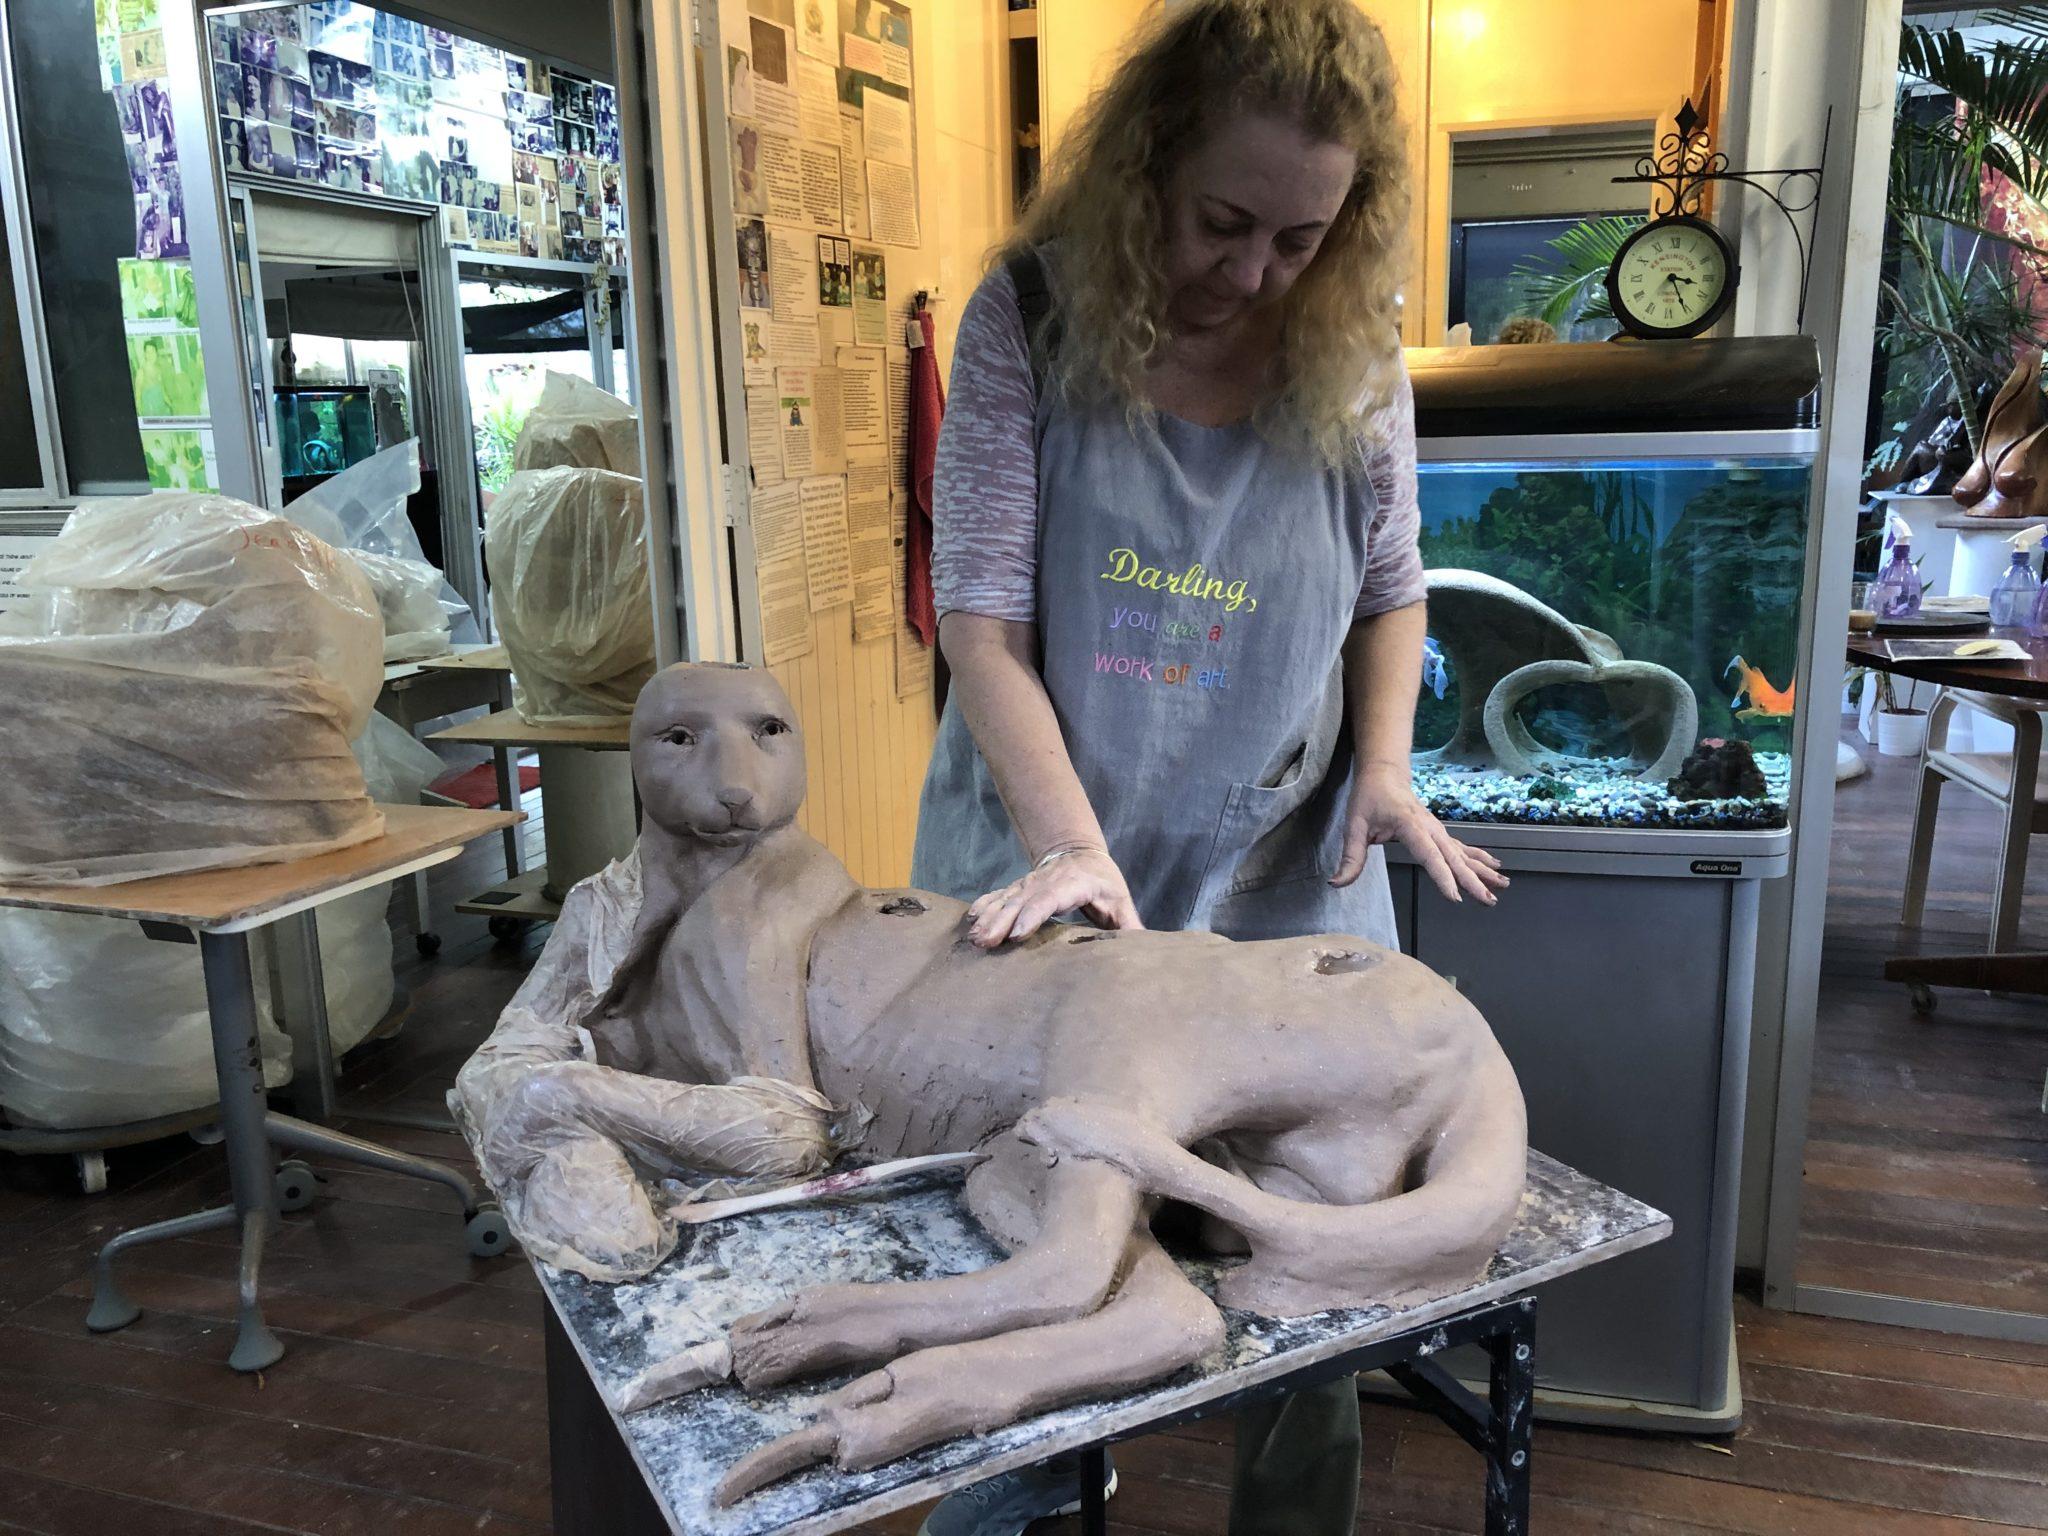 Kangaroo is now being sculpted in clay at the art class - Georgettes Art